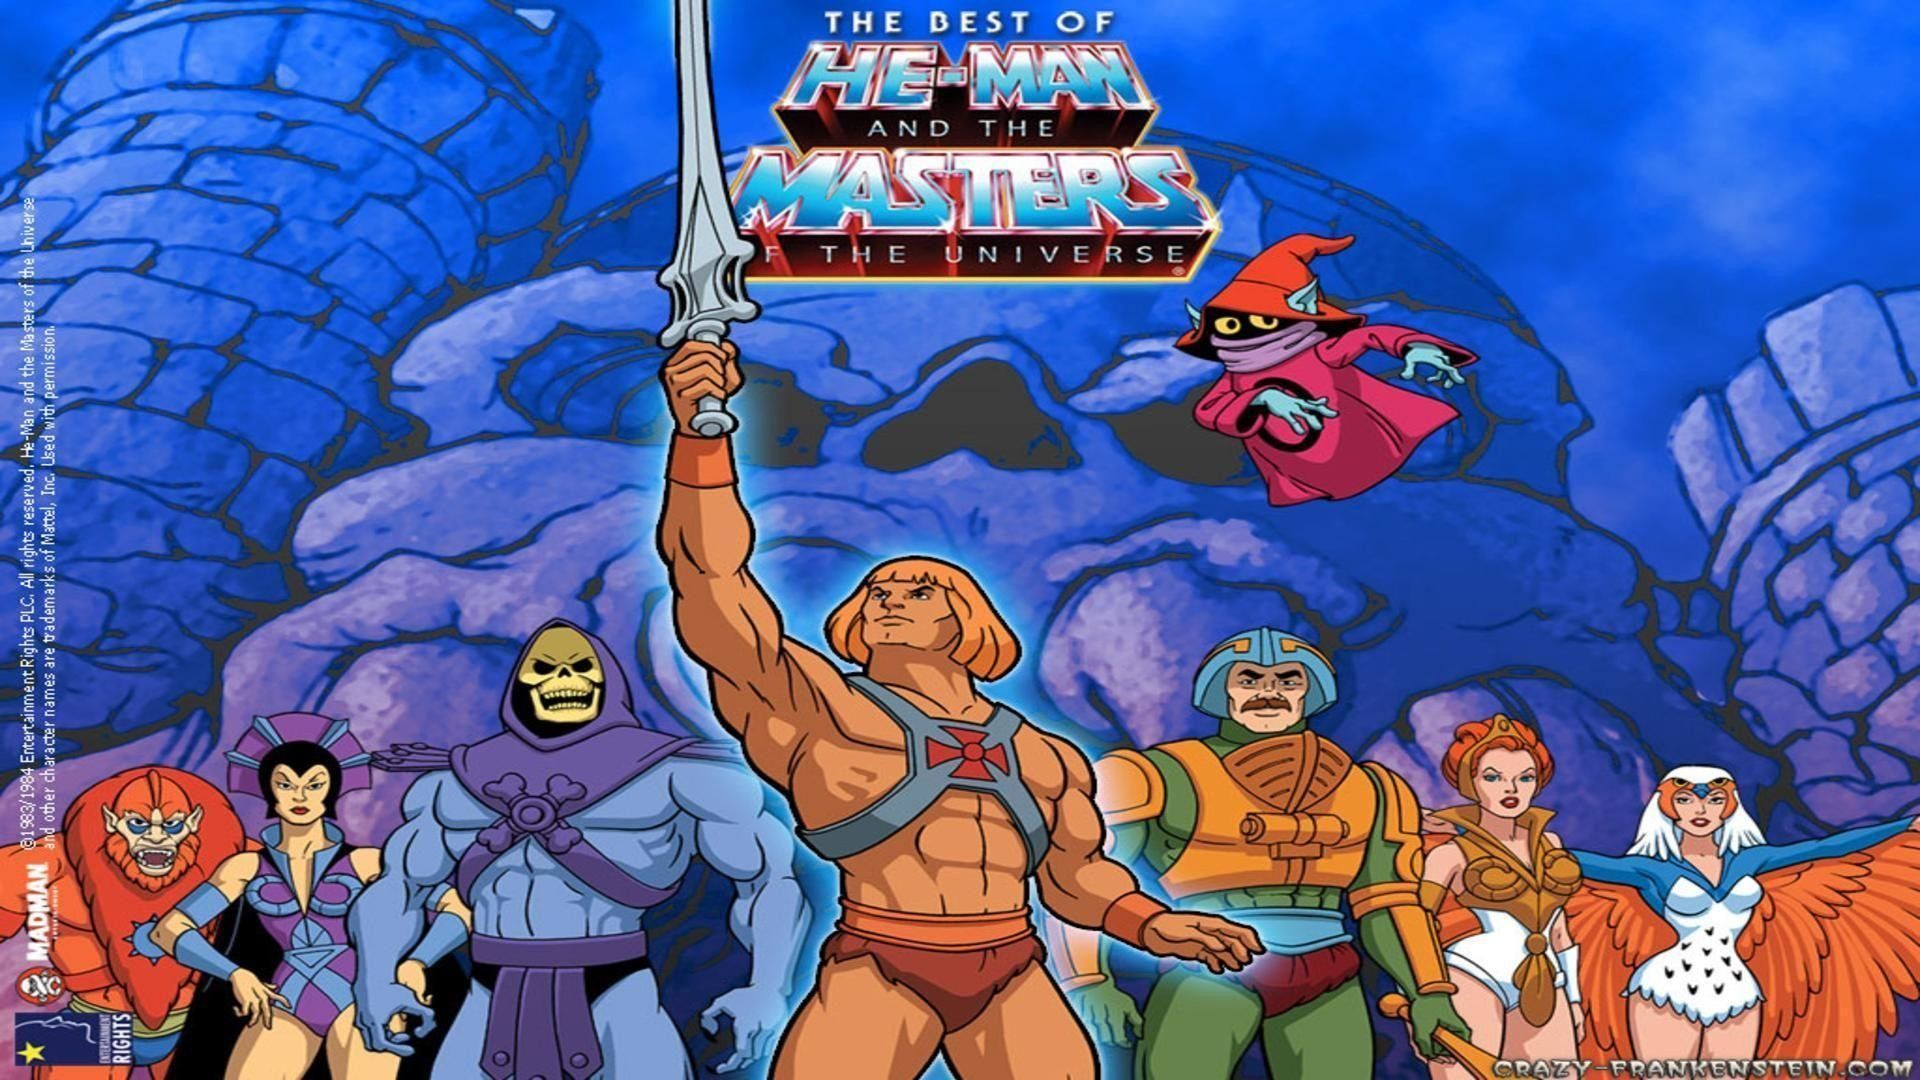 He-Man and the Masters of the Universe, Netflix, GamersRD